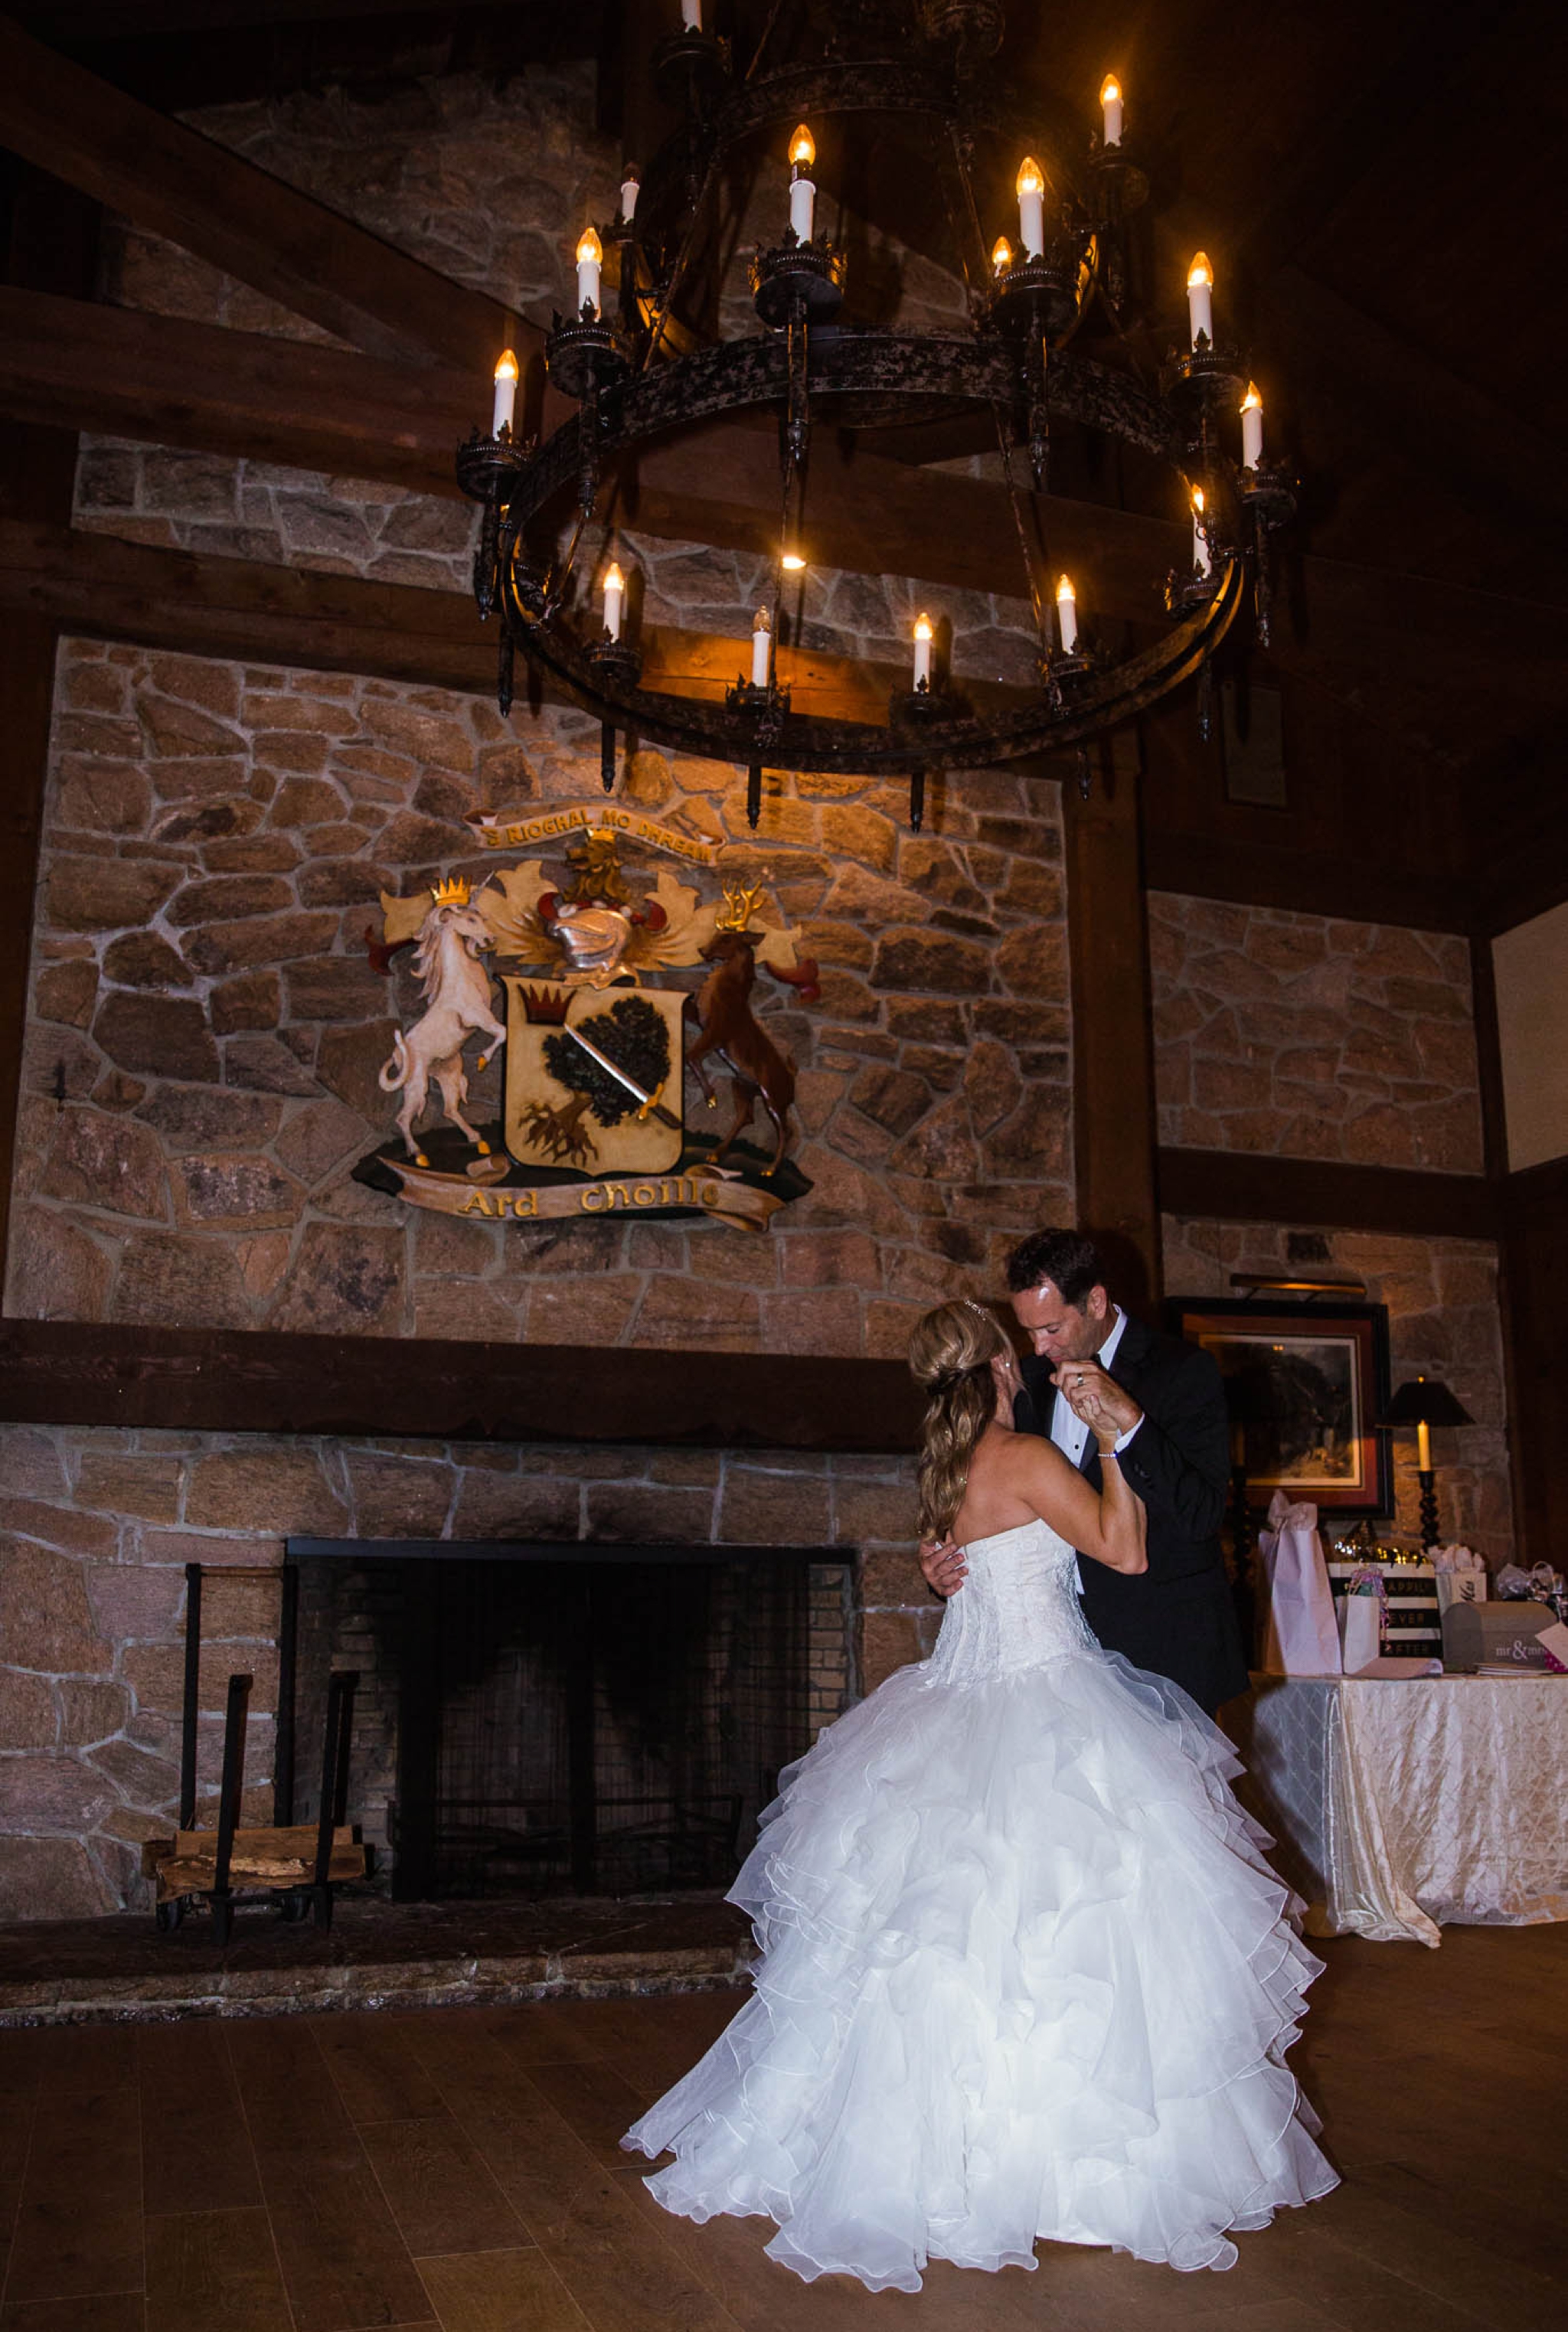 First Dance between bride and groom - Dona + Doug - MacGregor Downs Country Club in Cary, NC - Raleigh Wedding Photographer